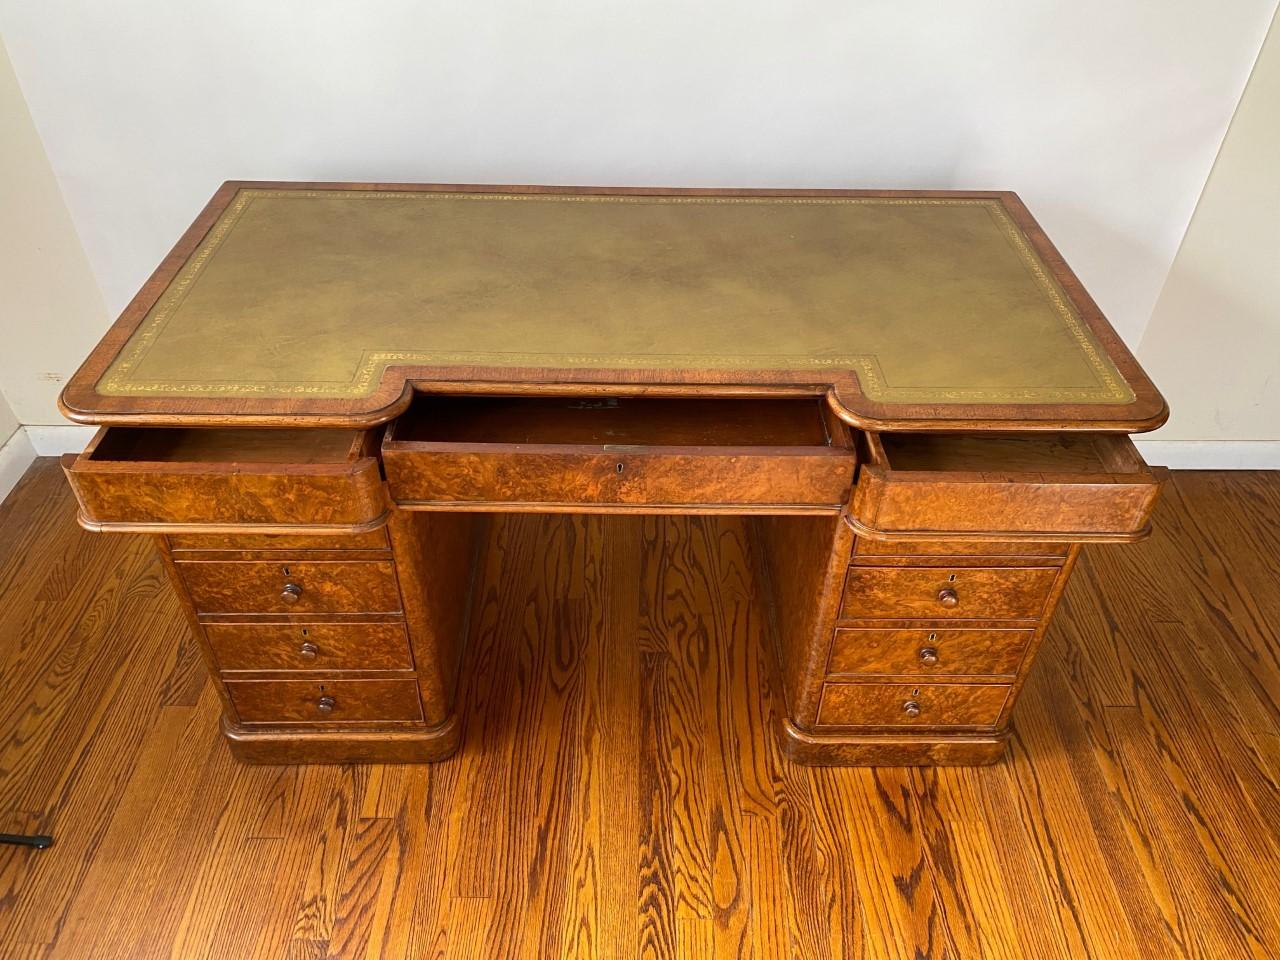 19th Century English Burr Walnut Victorian Pedestal Desk w/ Tooled Leather Top For Sale 6